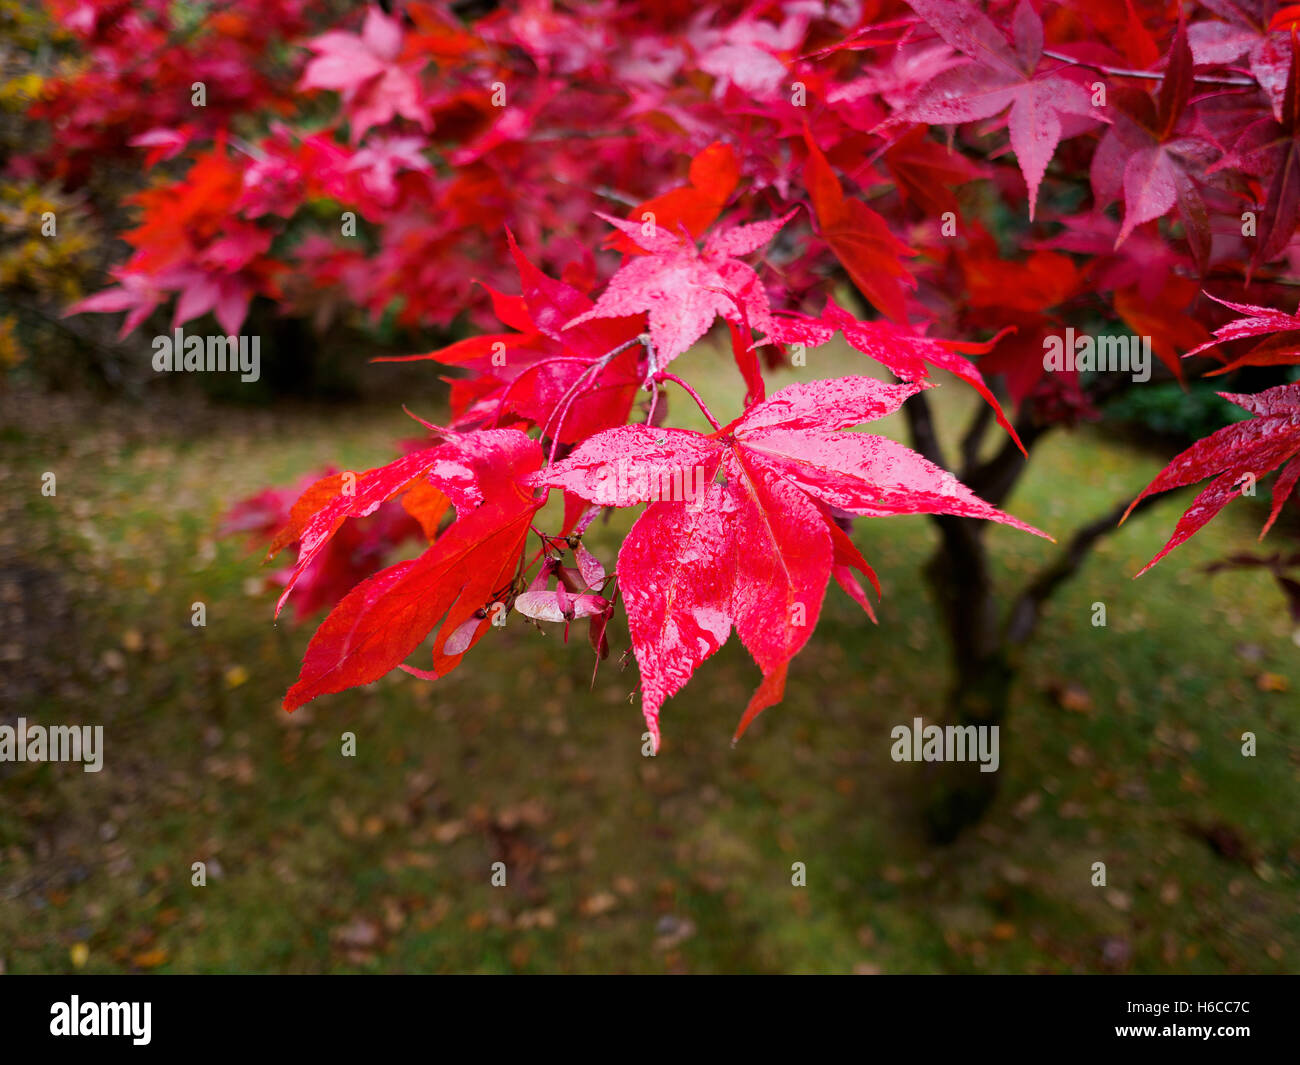 Acer Tree Leaves Changing Colour in Autumn Stock Photo